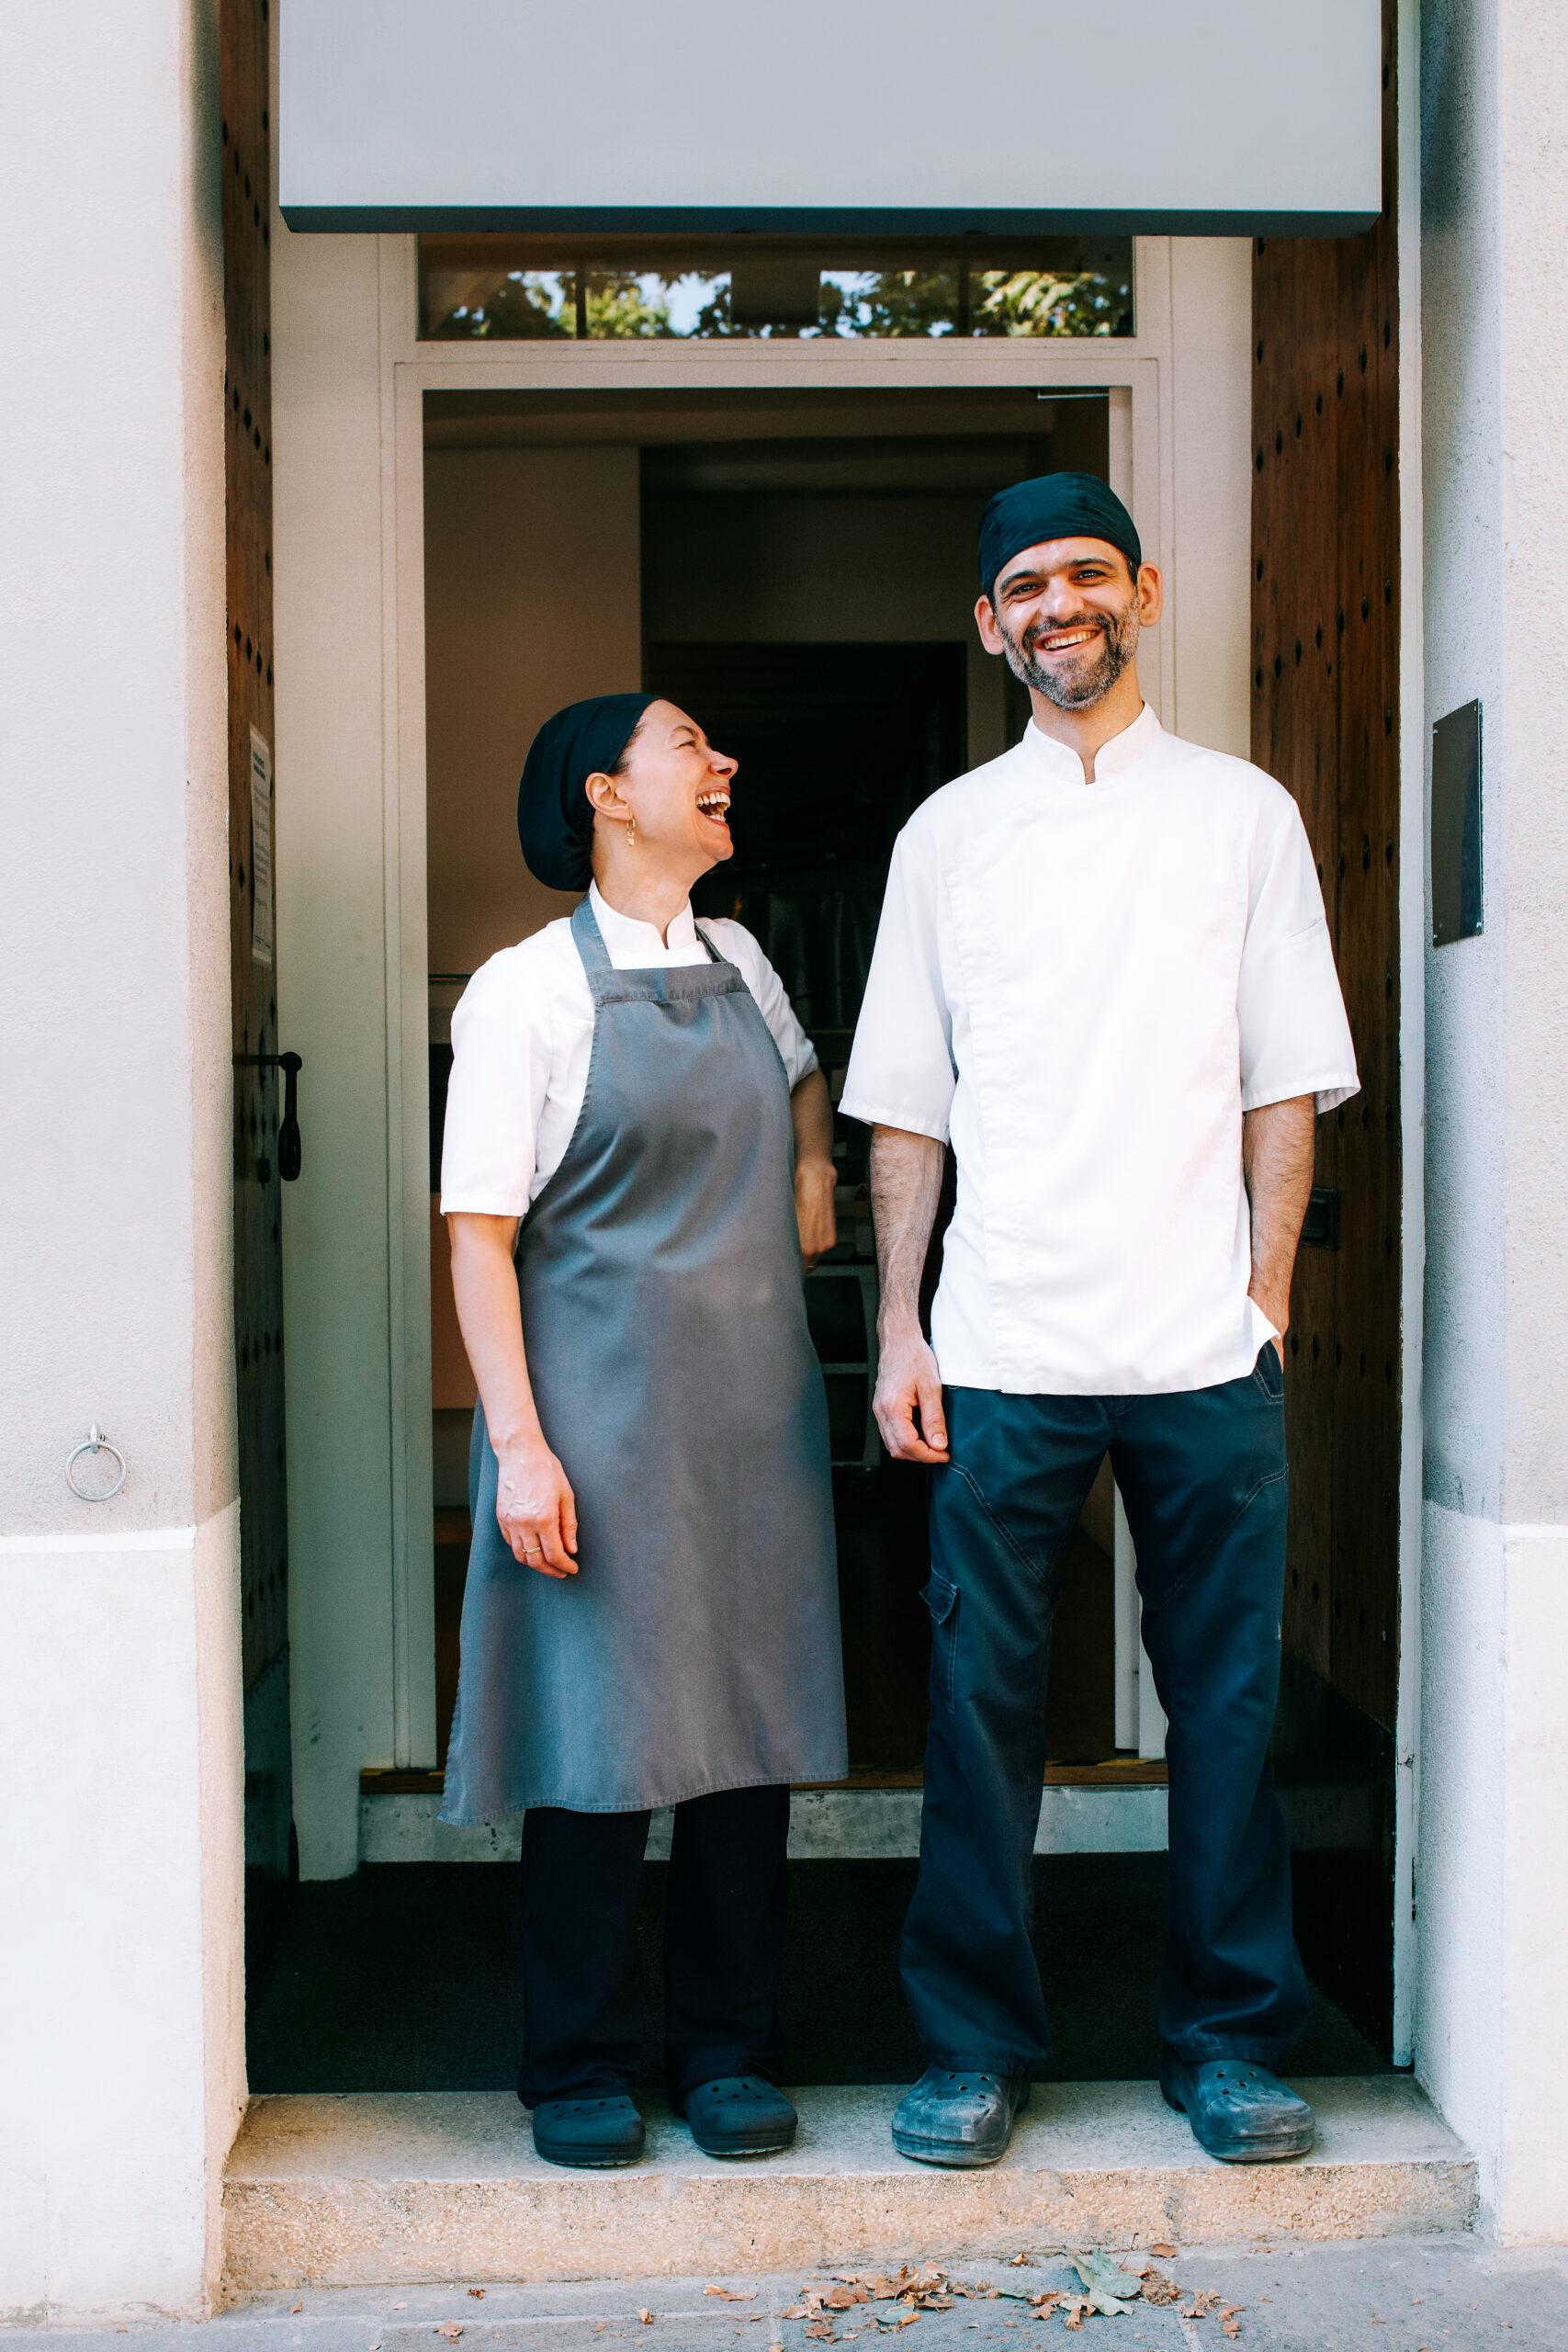 Two restaurant owners, a female wearing an apron smiling at a man with a mustache.